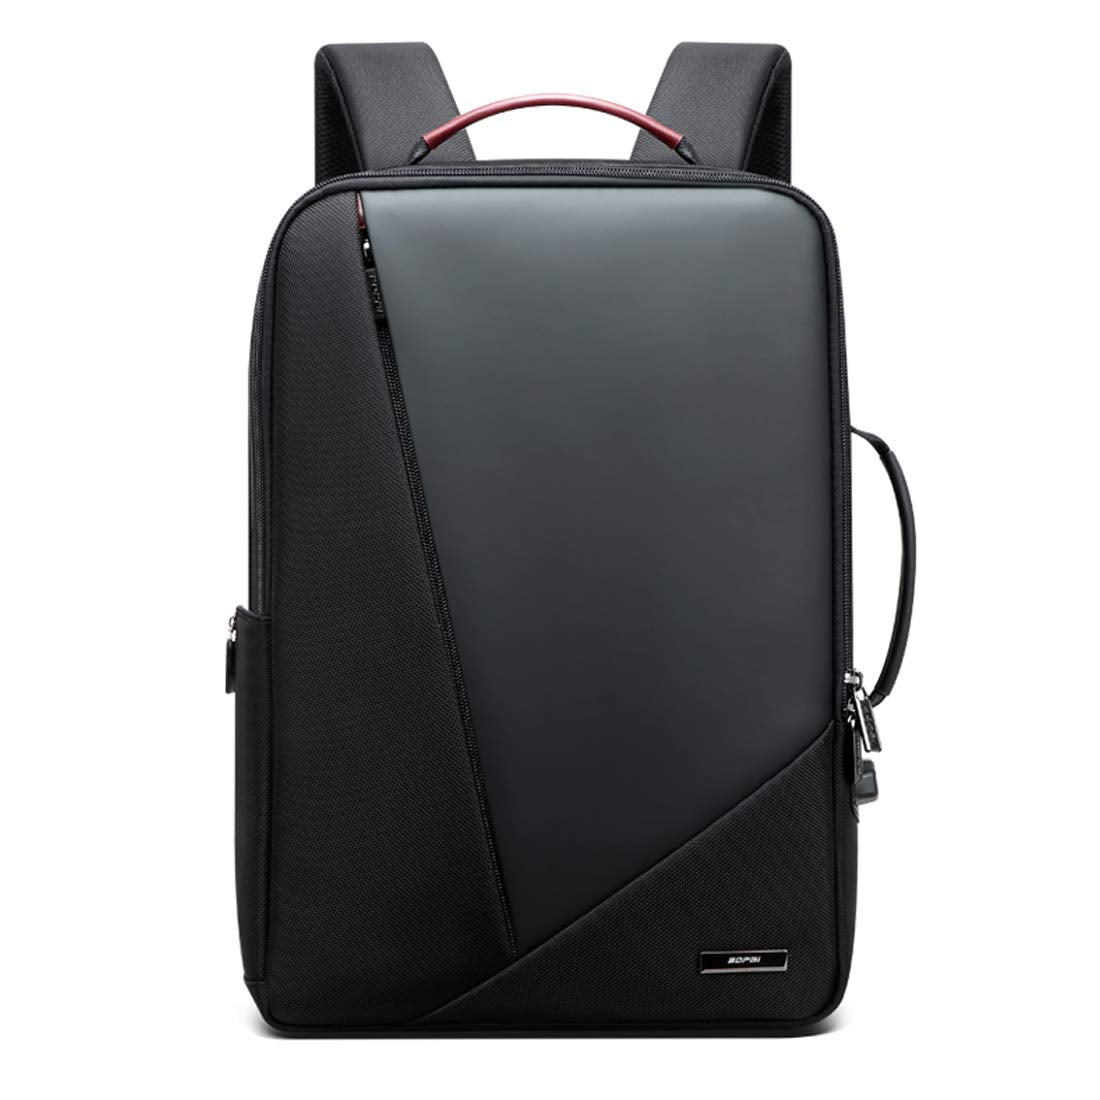 BOPAI Anti Theft Laptop Backpack with USB Charging Port (Black)